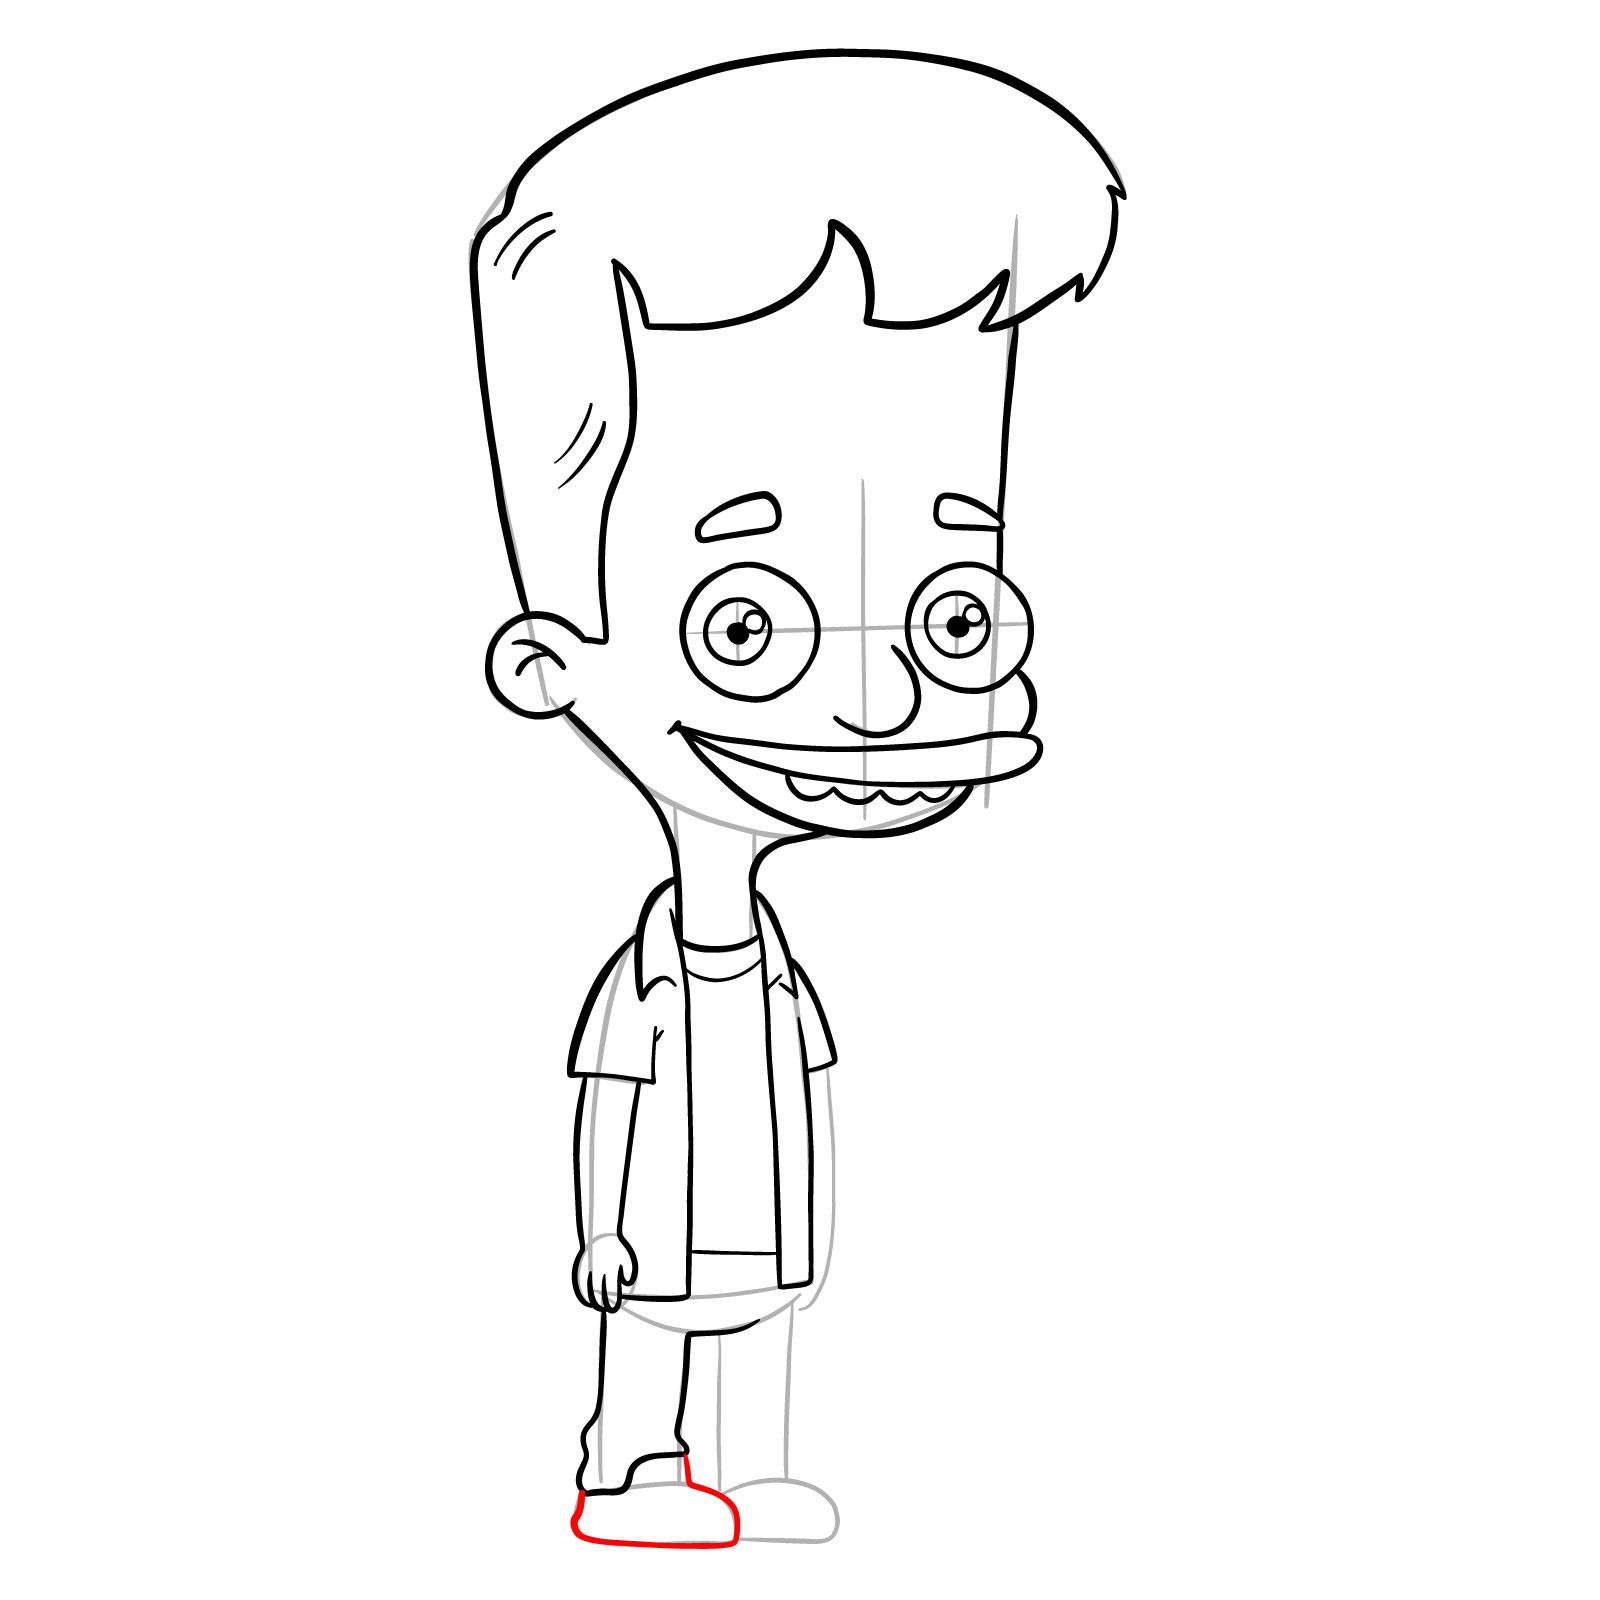 How to draw Nick Birch from Big Mouth - step 21